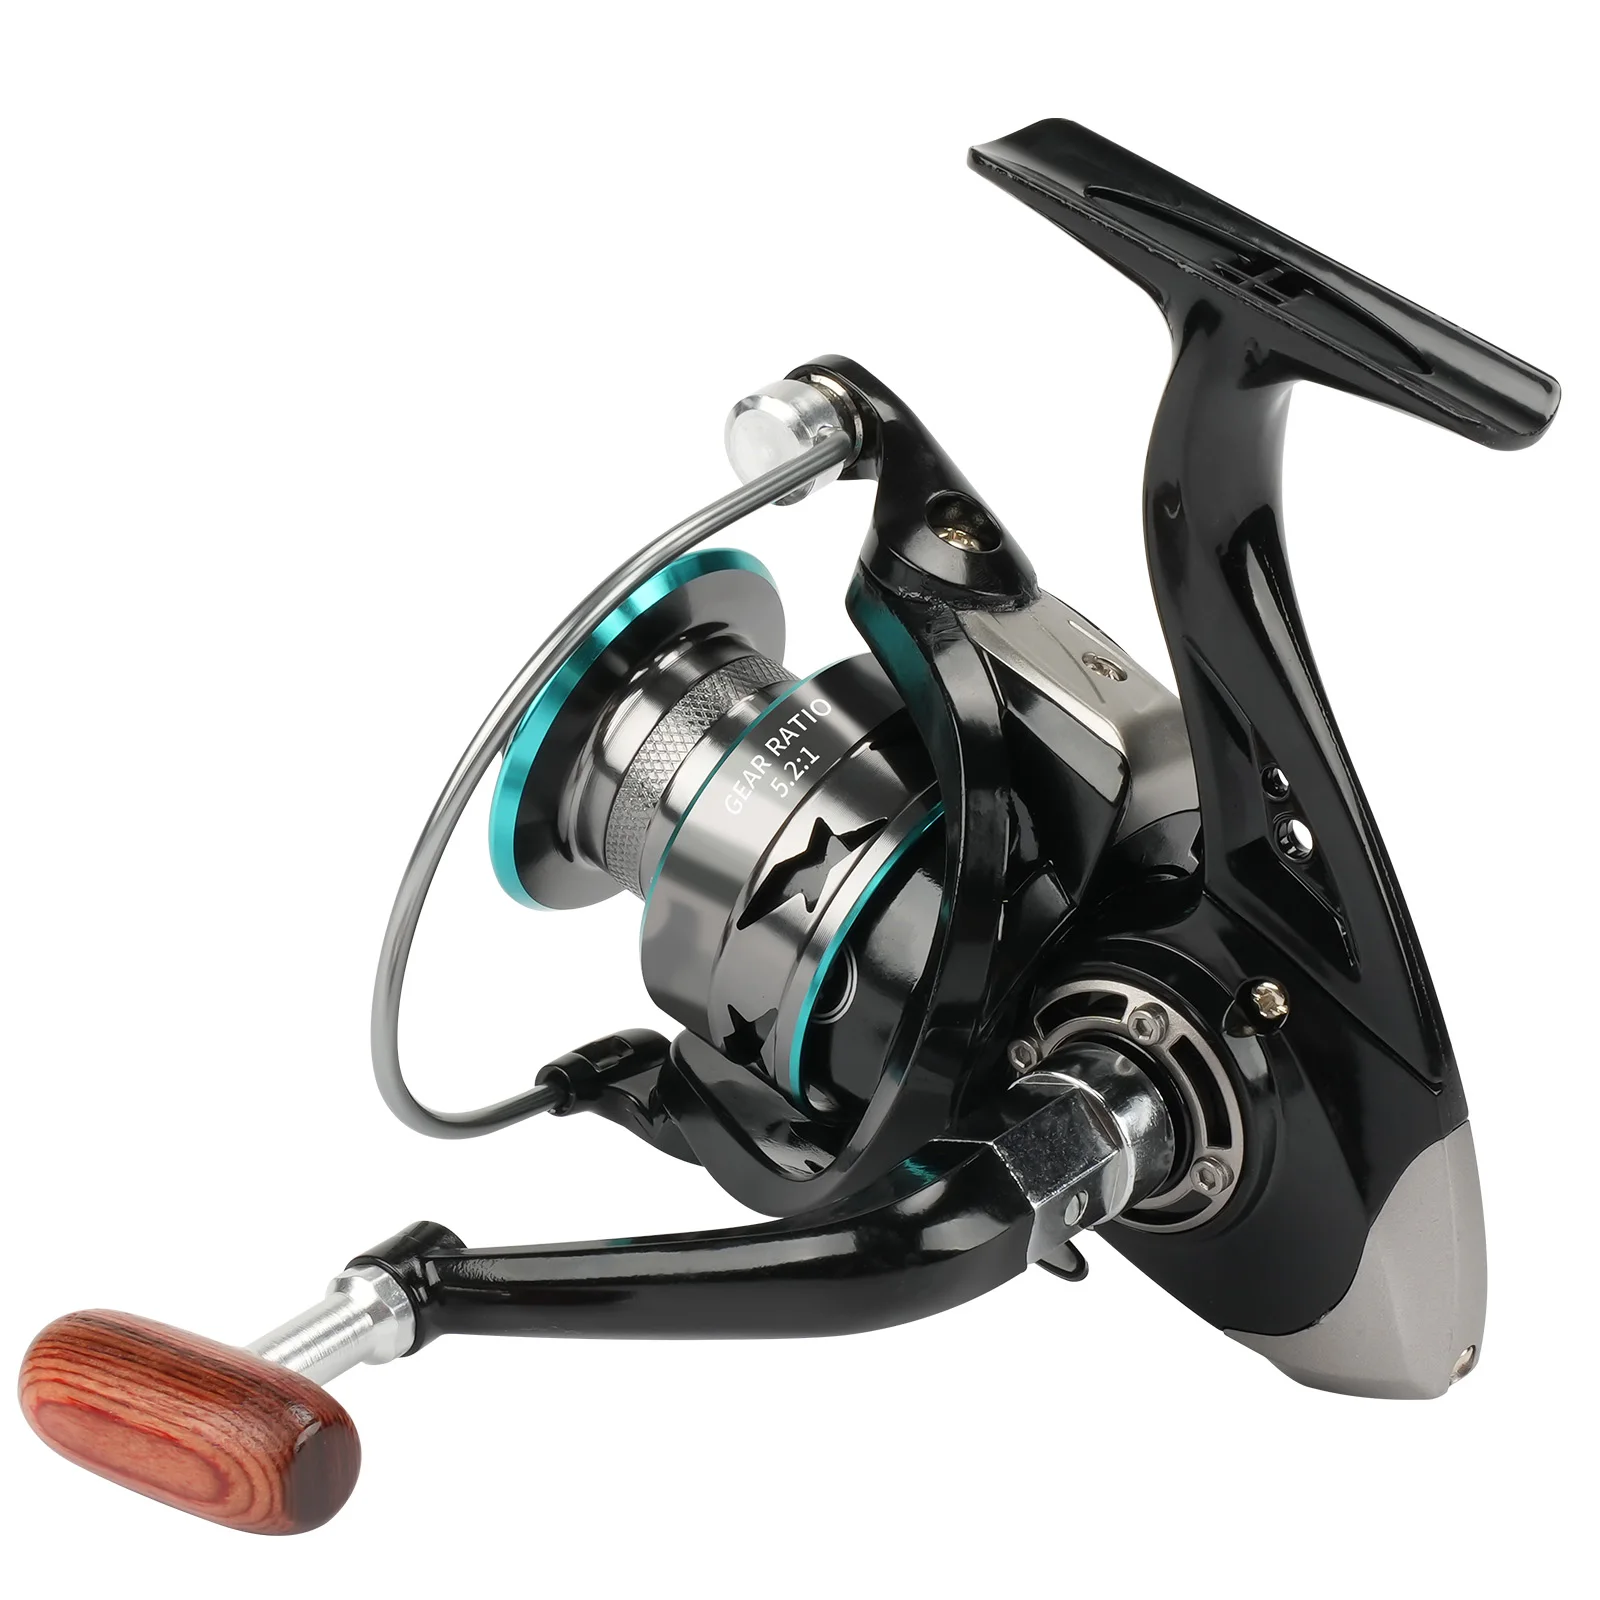 HAUT TON 1000/2000/3000/4000/5000/6000/7000 Spinning reel,5.2:1,12+1stainless  BB 22-30Lbs Drag system,For Saltwater Freshwater - AliExpress